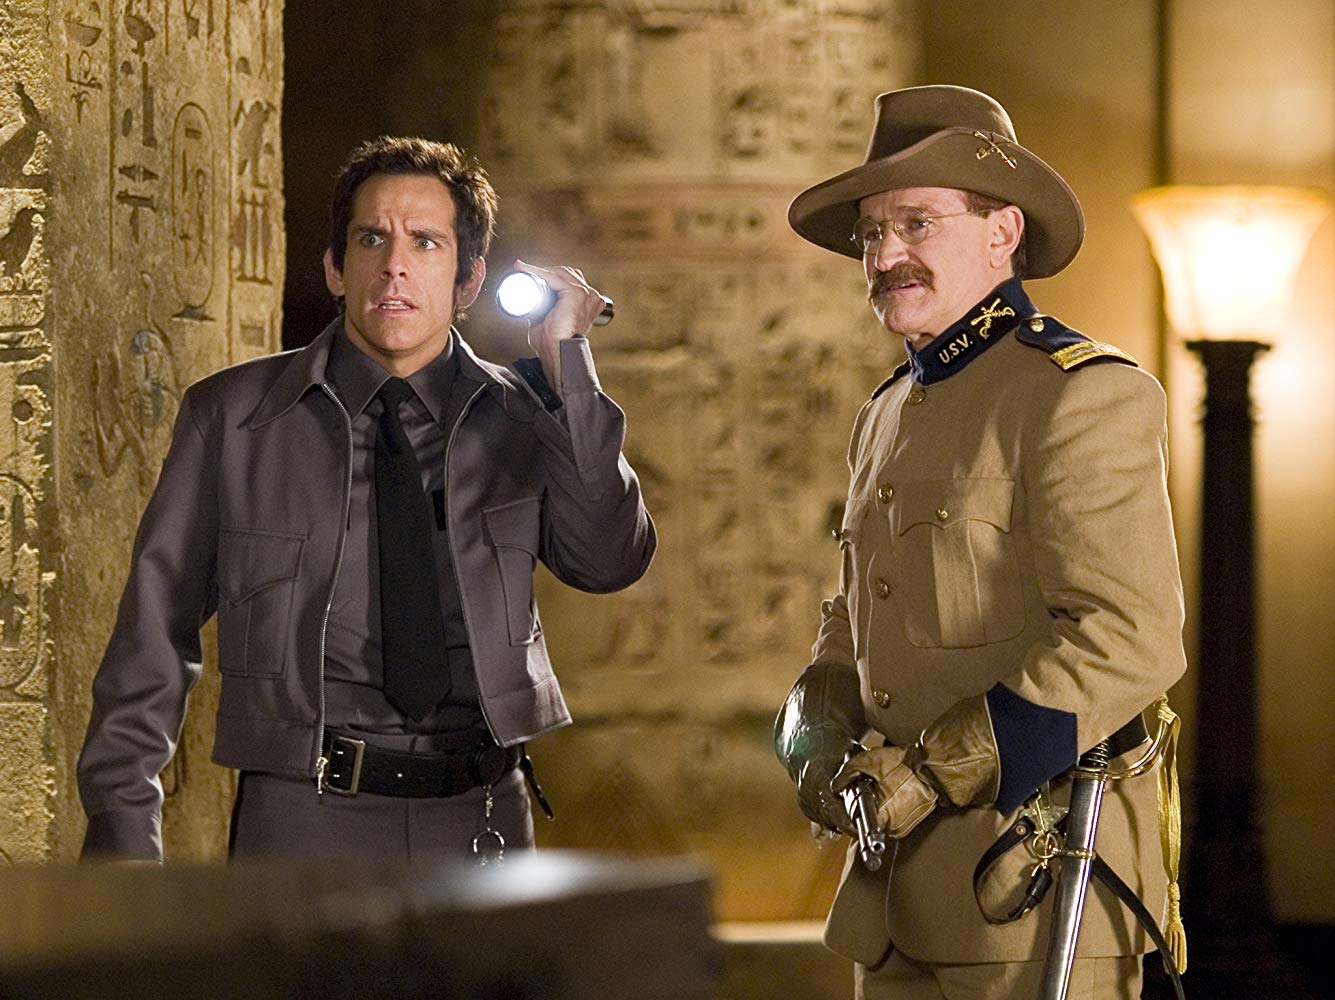 Security guard Larry Daley (Ben Stiller) and Teddy Roosevelt (Robin Williams) in Night at the Museum (2006)